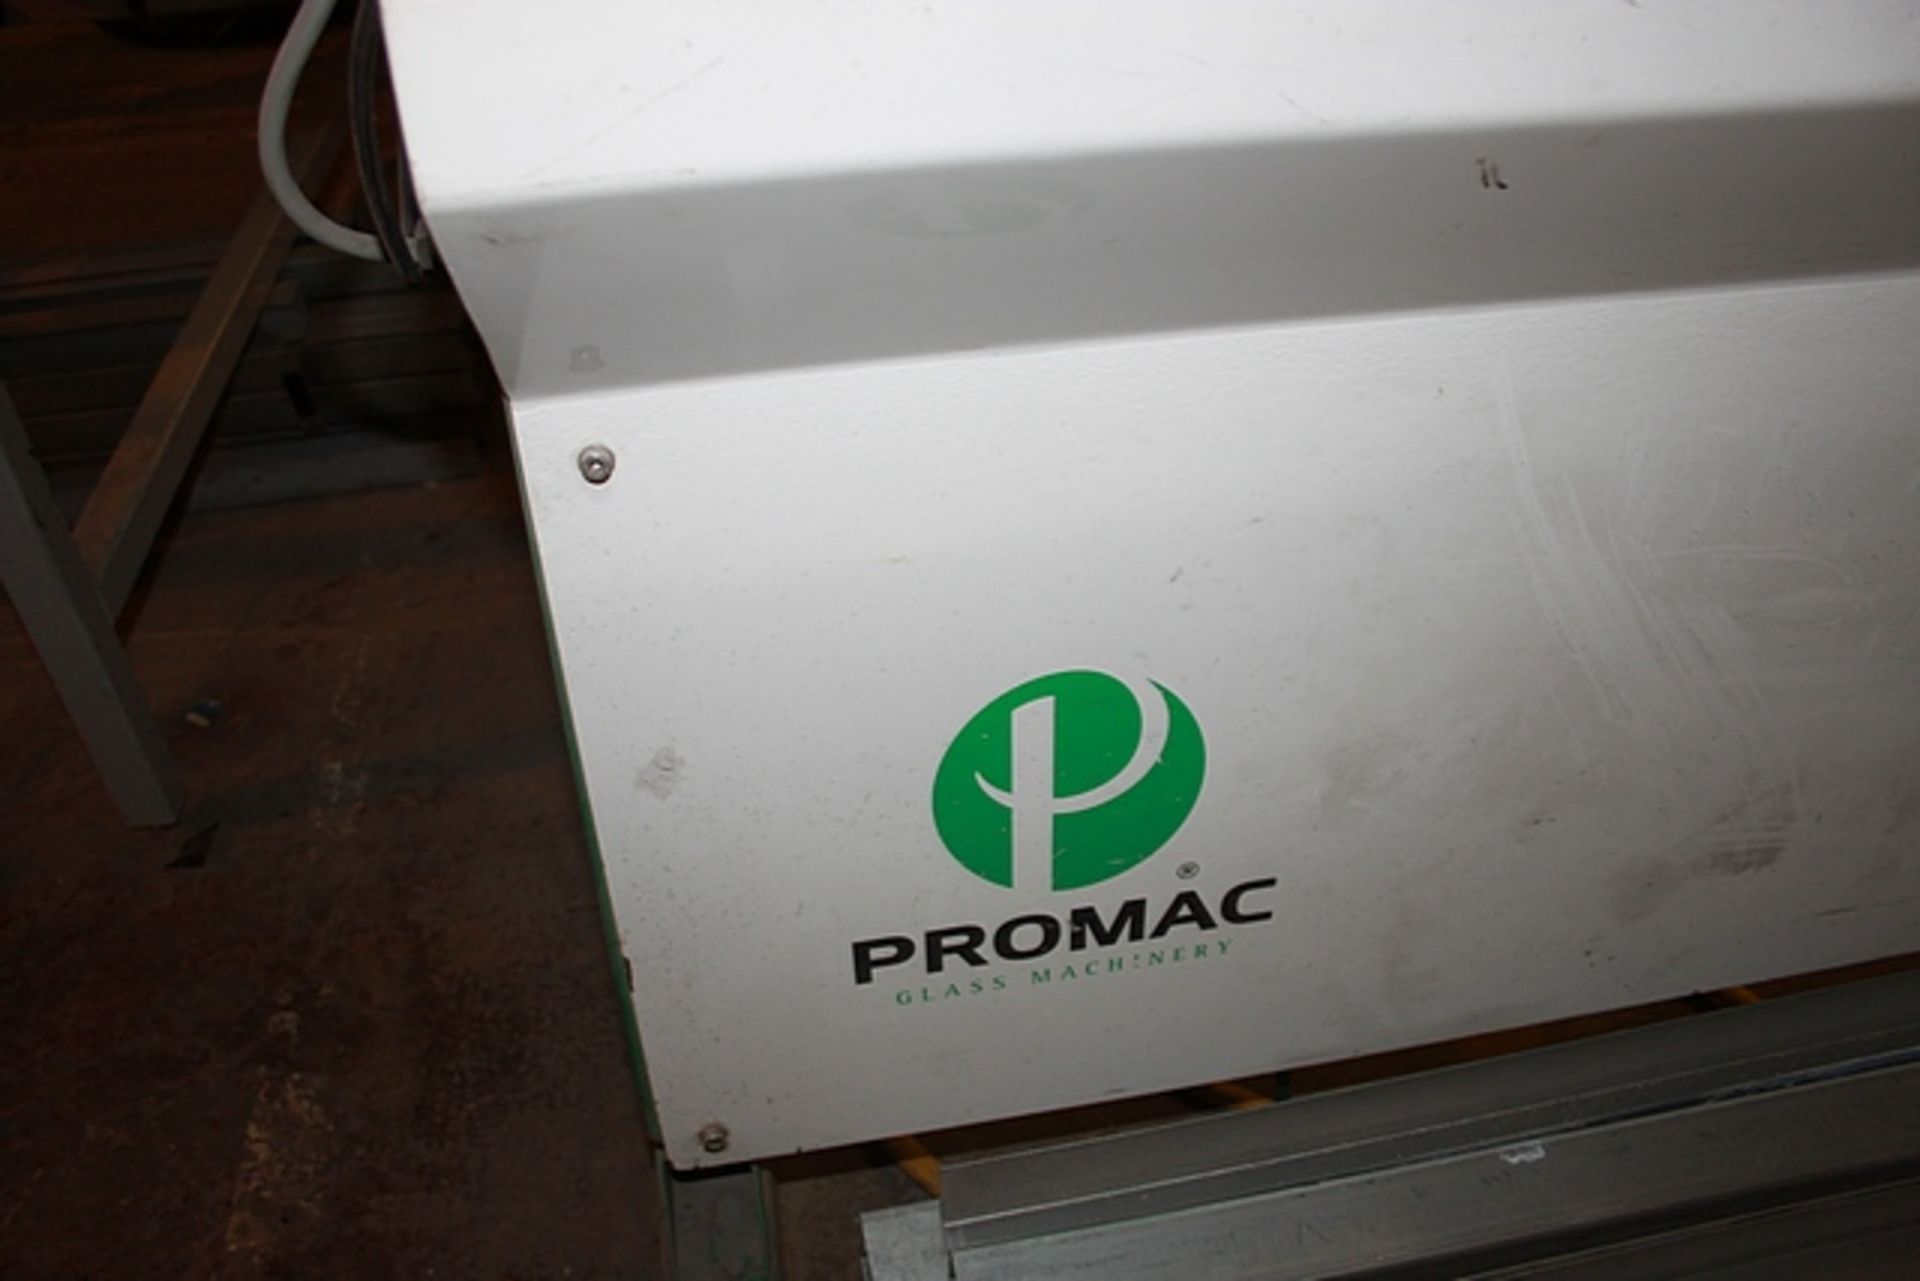 Promac vertical glass washer automatic machine for vertically washing and drying glass - Image 7 of 7